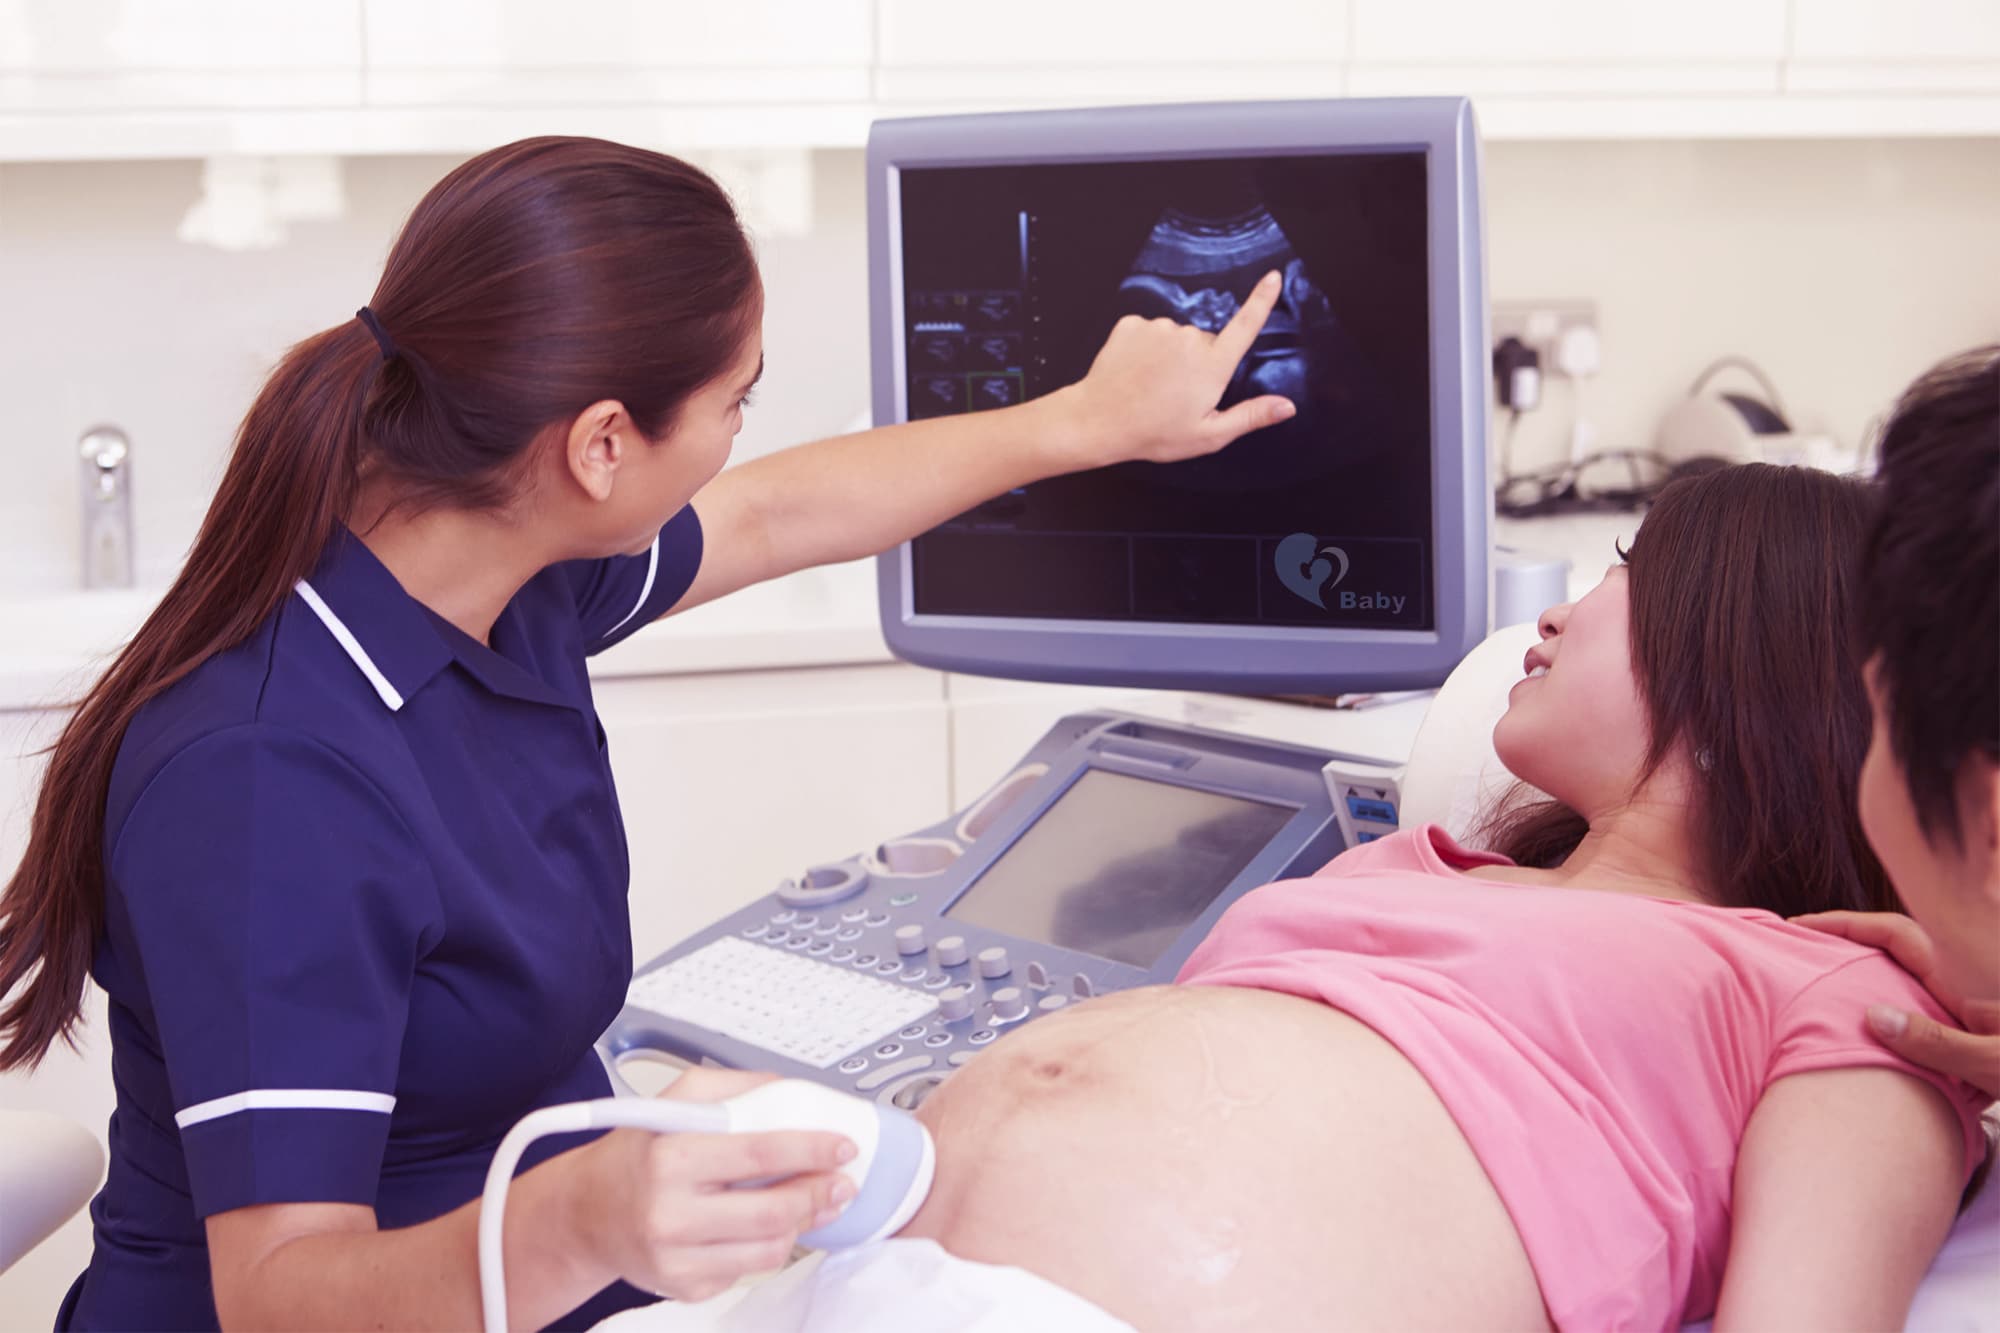 Lady having a baby scan with gel on her baby